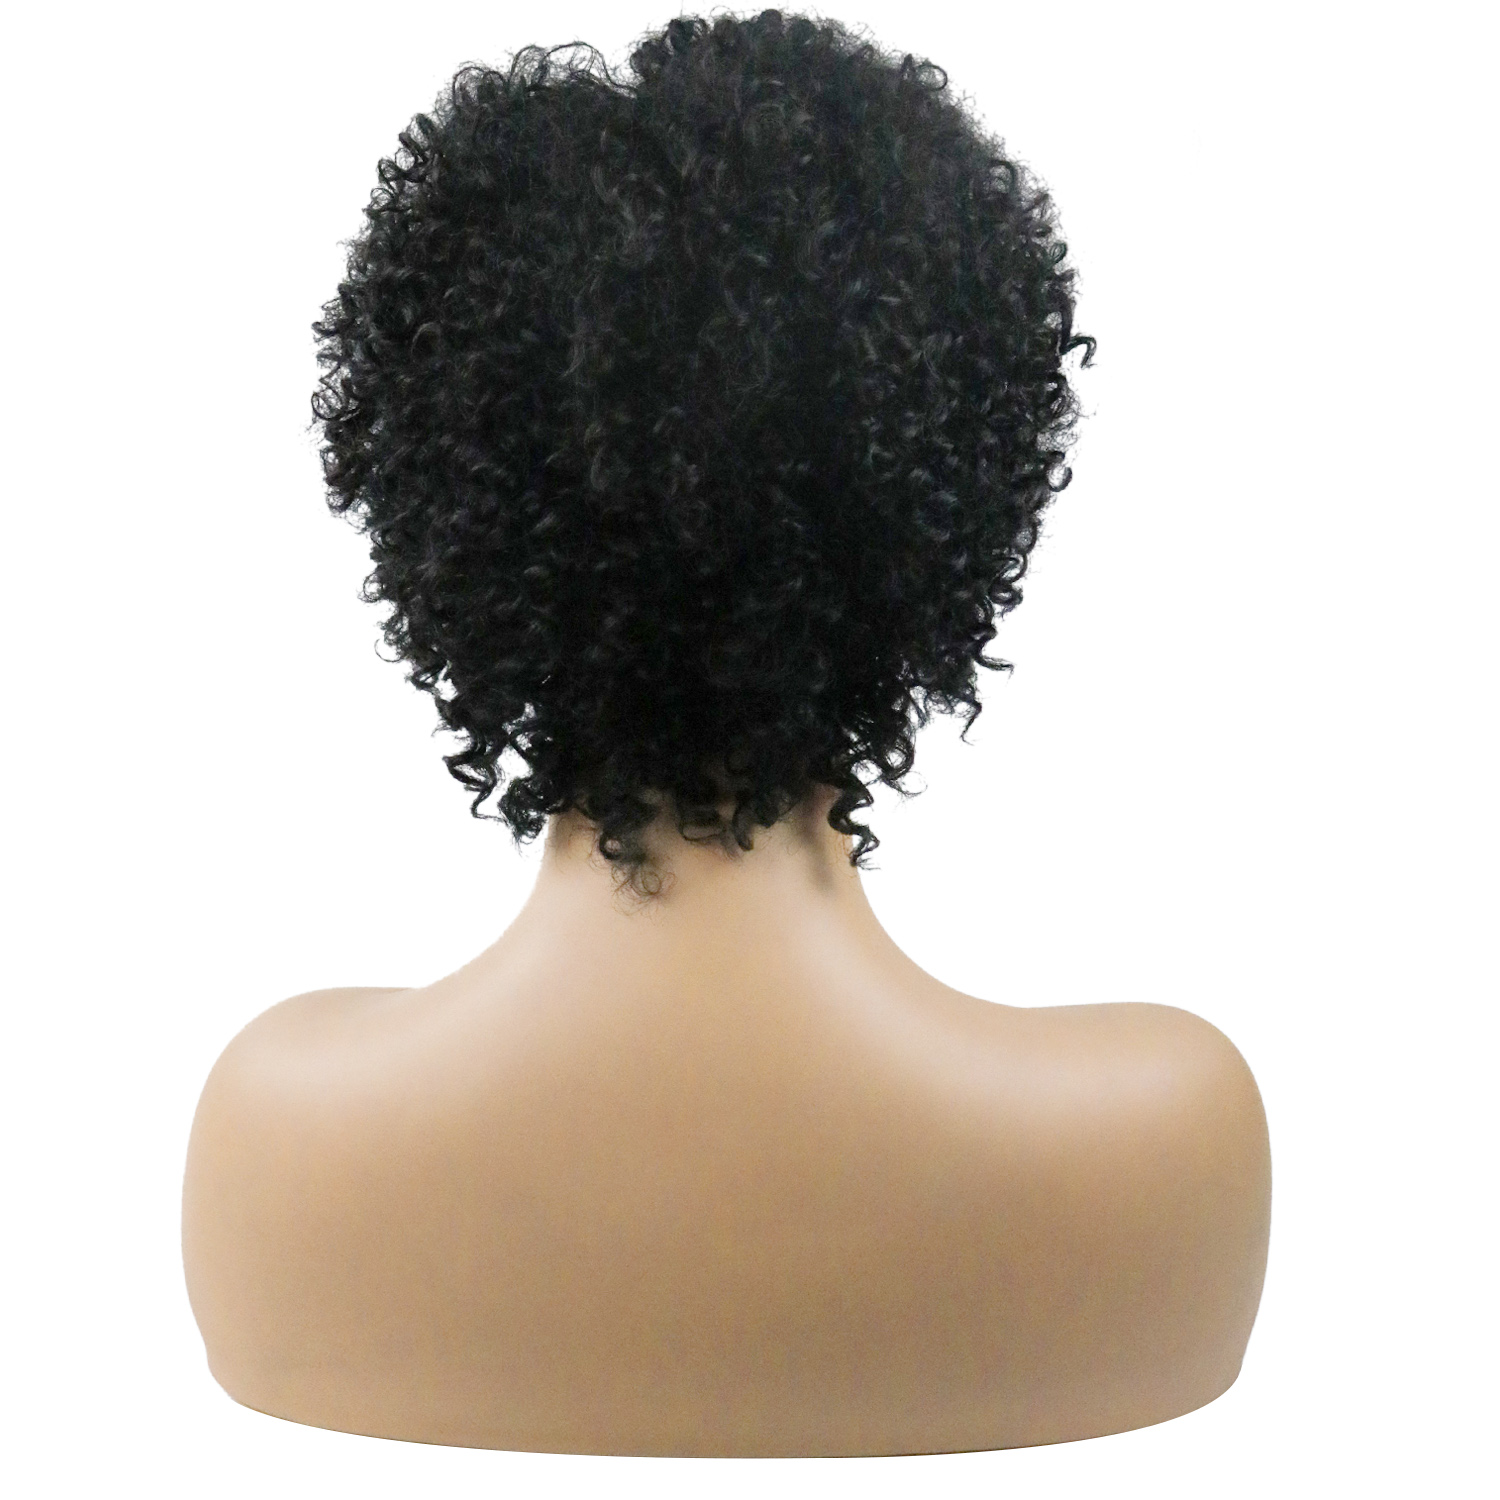 Women's Mid Length Kinky Curly Synthetic Hair Wigs Capless Wigs 14 Inches